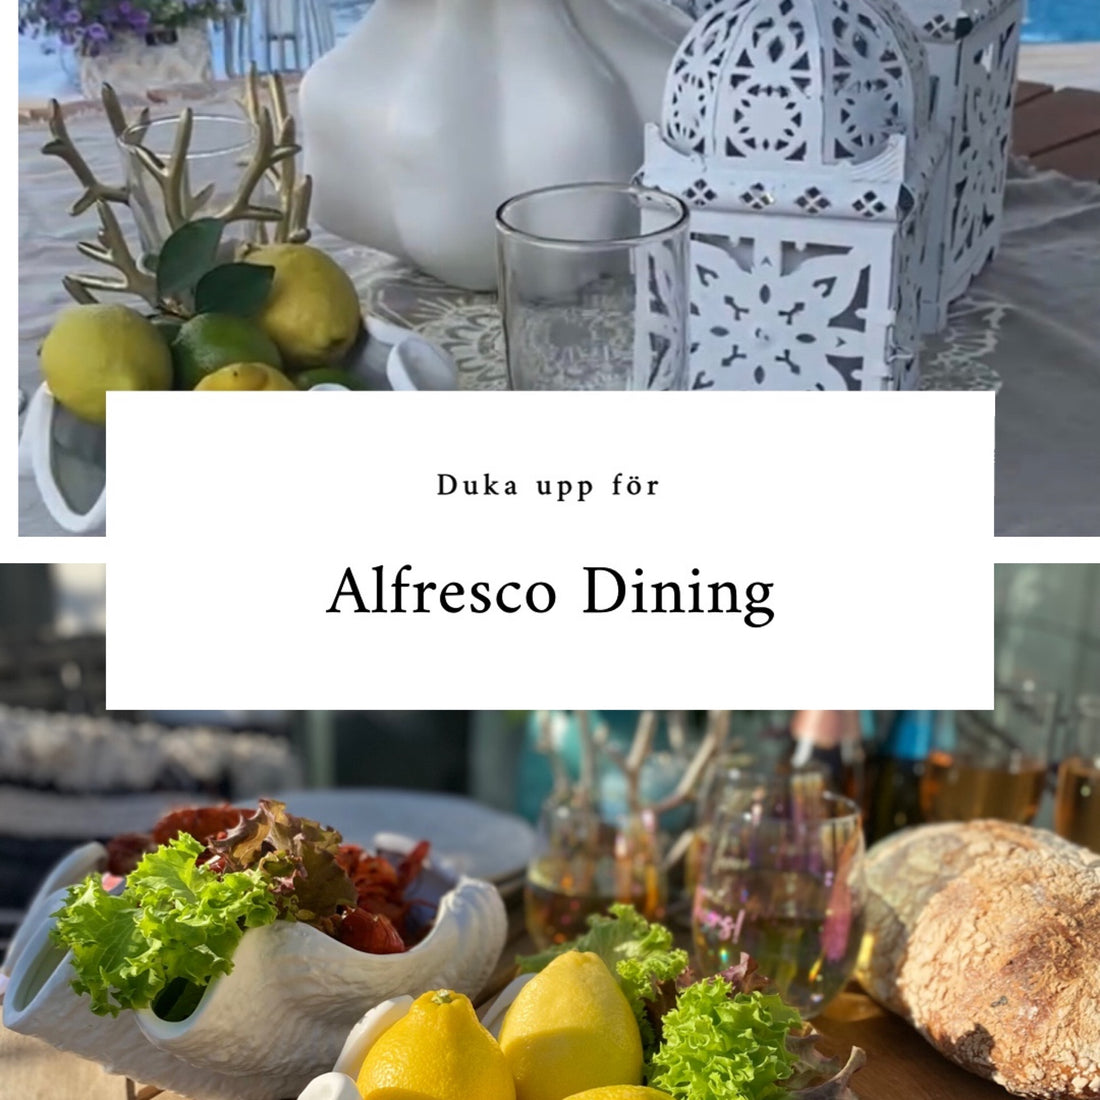 Alfresco Dining - dining outside!